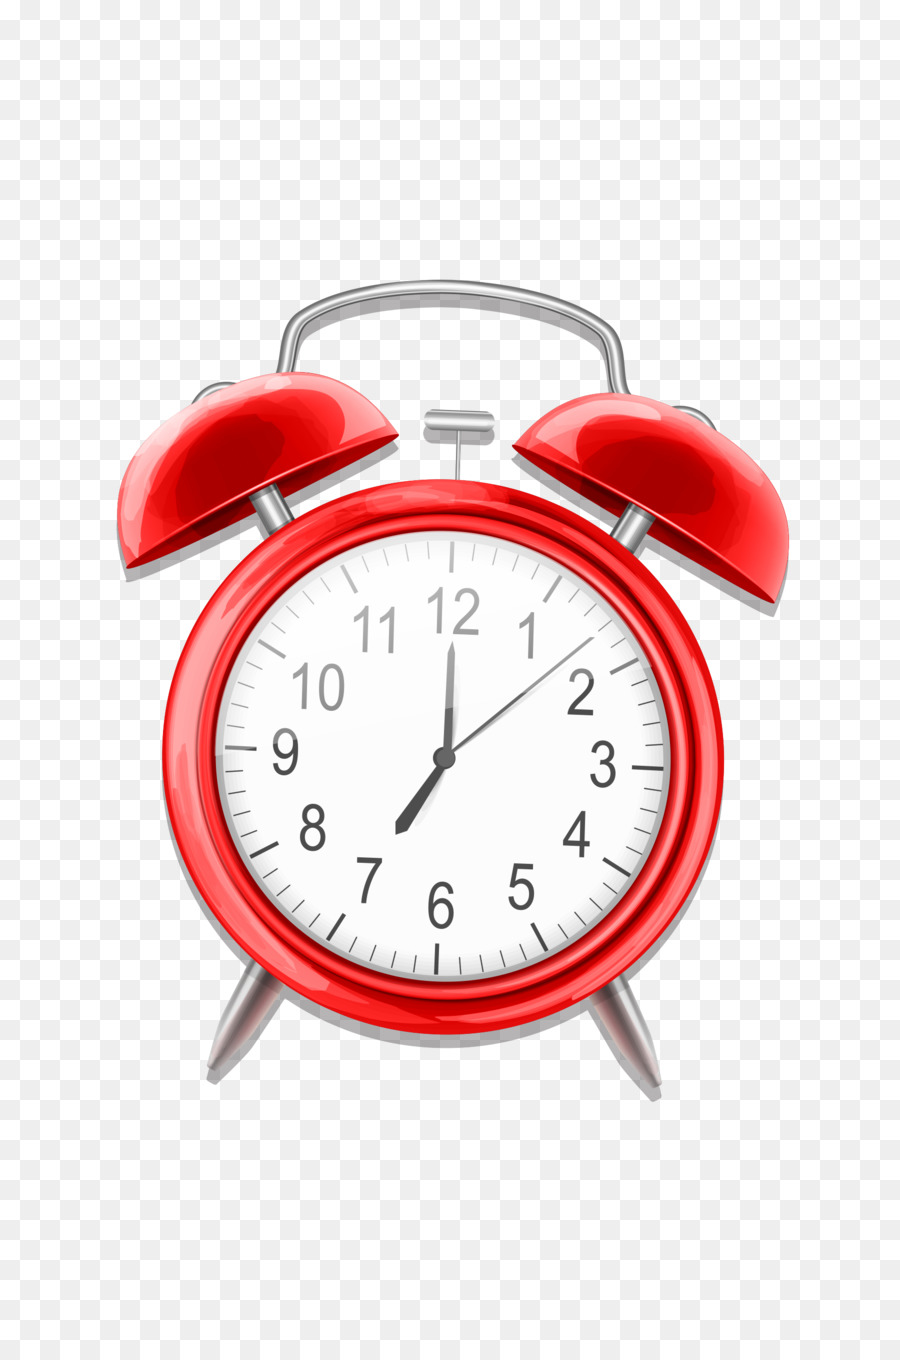 Free Alarm Clock Transparent Background Download Free Clip Art Free Clip Art On Clipart Library Every iphone 13 rumours are expecting in 2021. clipart library